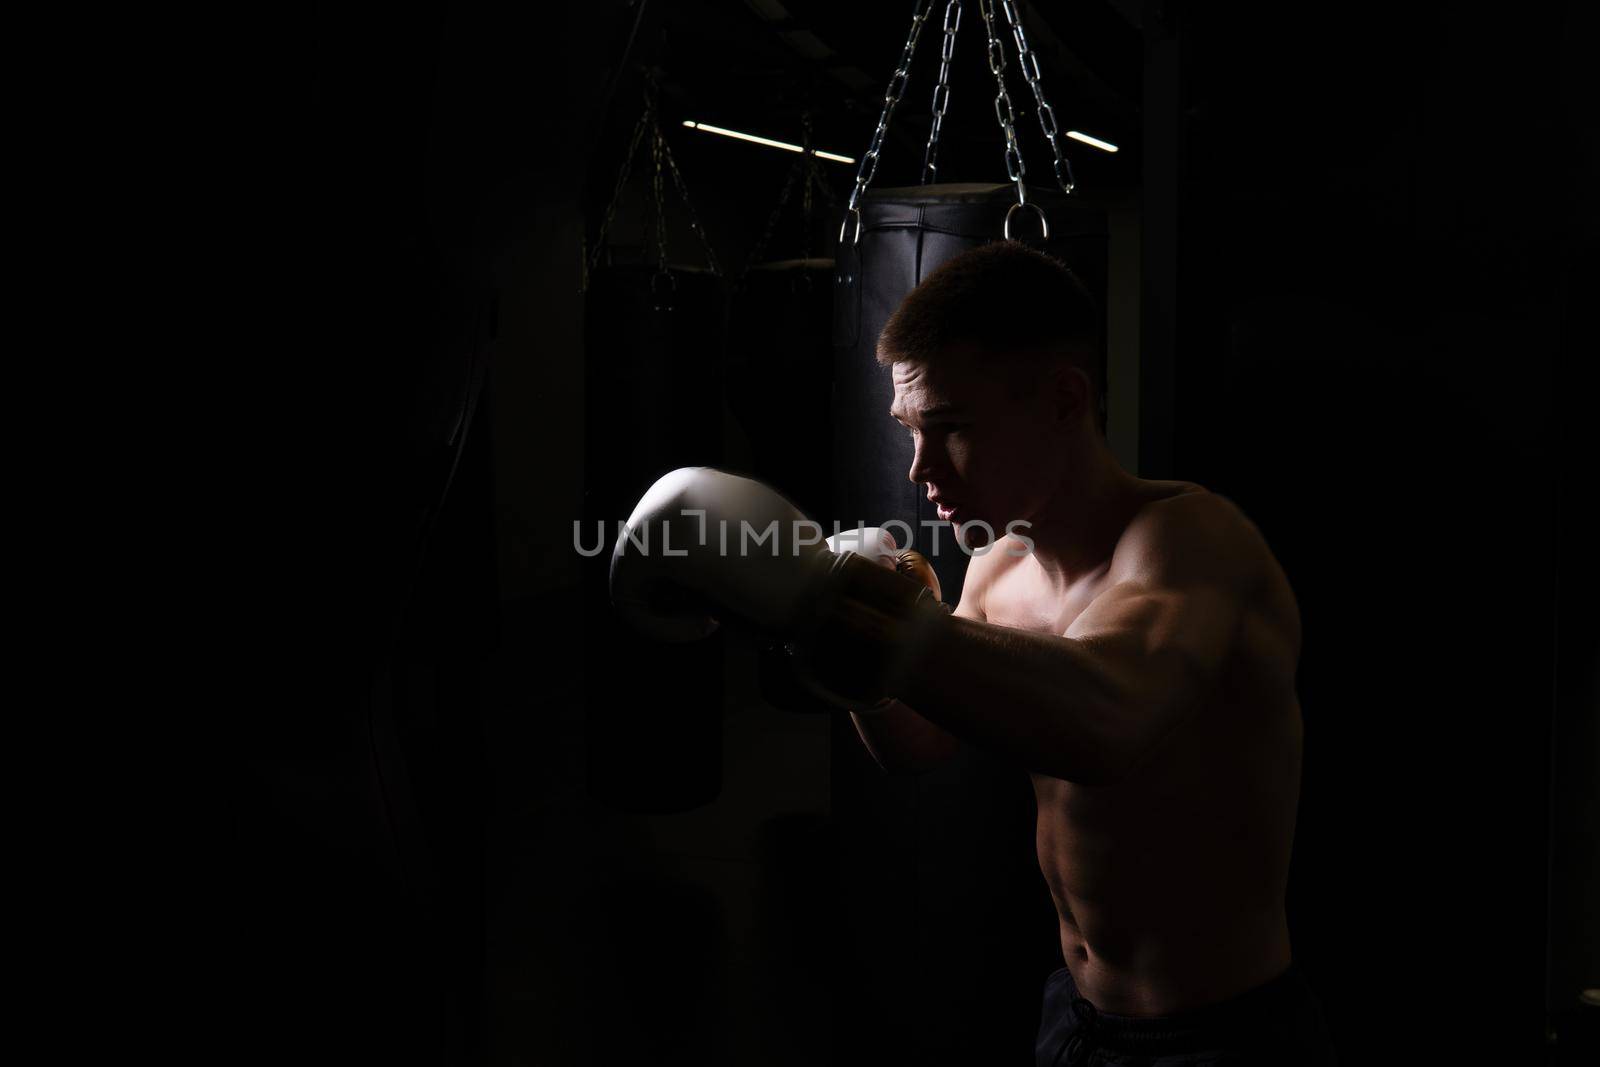 The blows the bag boxer practices athlete glove black young professional body, from strength fighter in combat for exercise lifestyle, training aggression. Backlit victory box, fitness